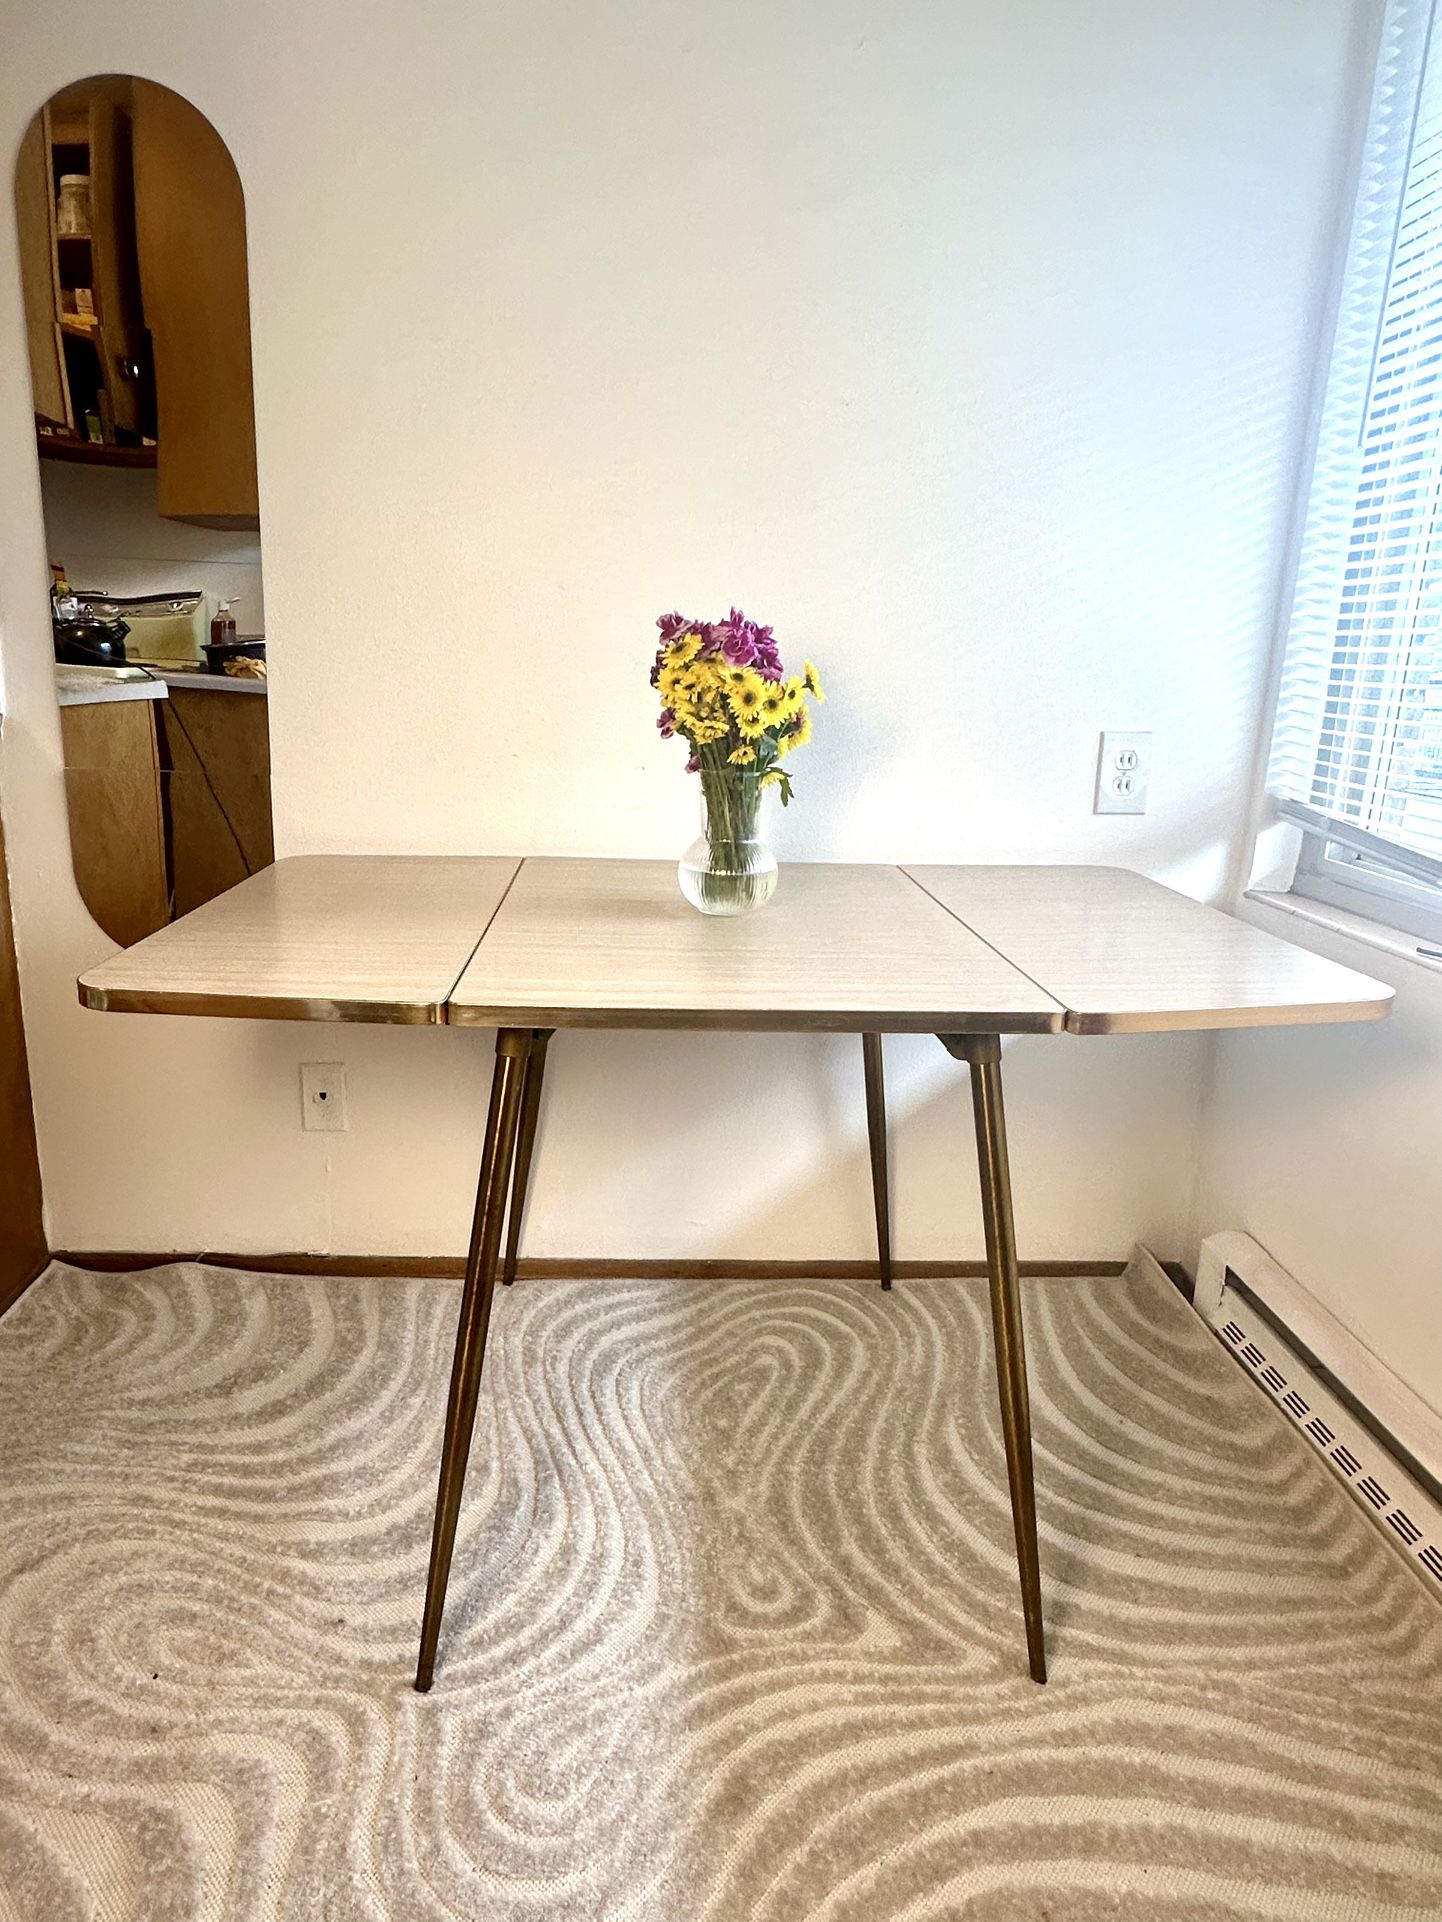 Vintage Retro Atomic Space Age 1950s Mid-Century Modern Eames Era Drop Leaf Formica Dining Kitchen Table